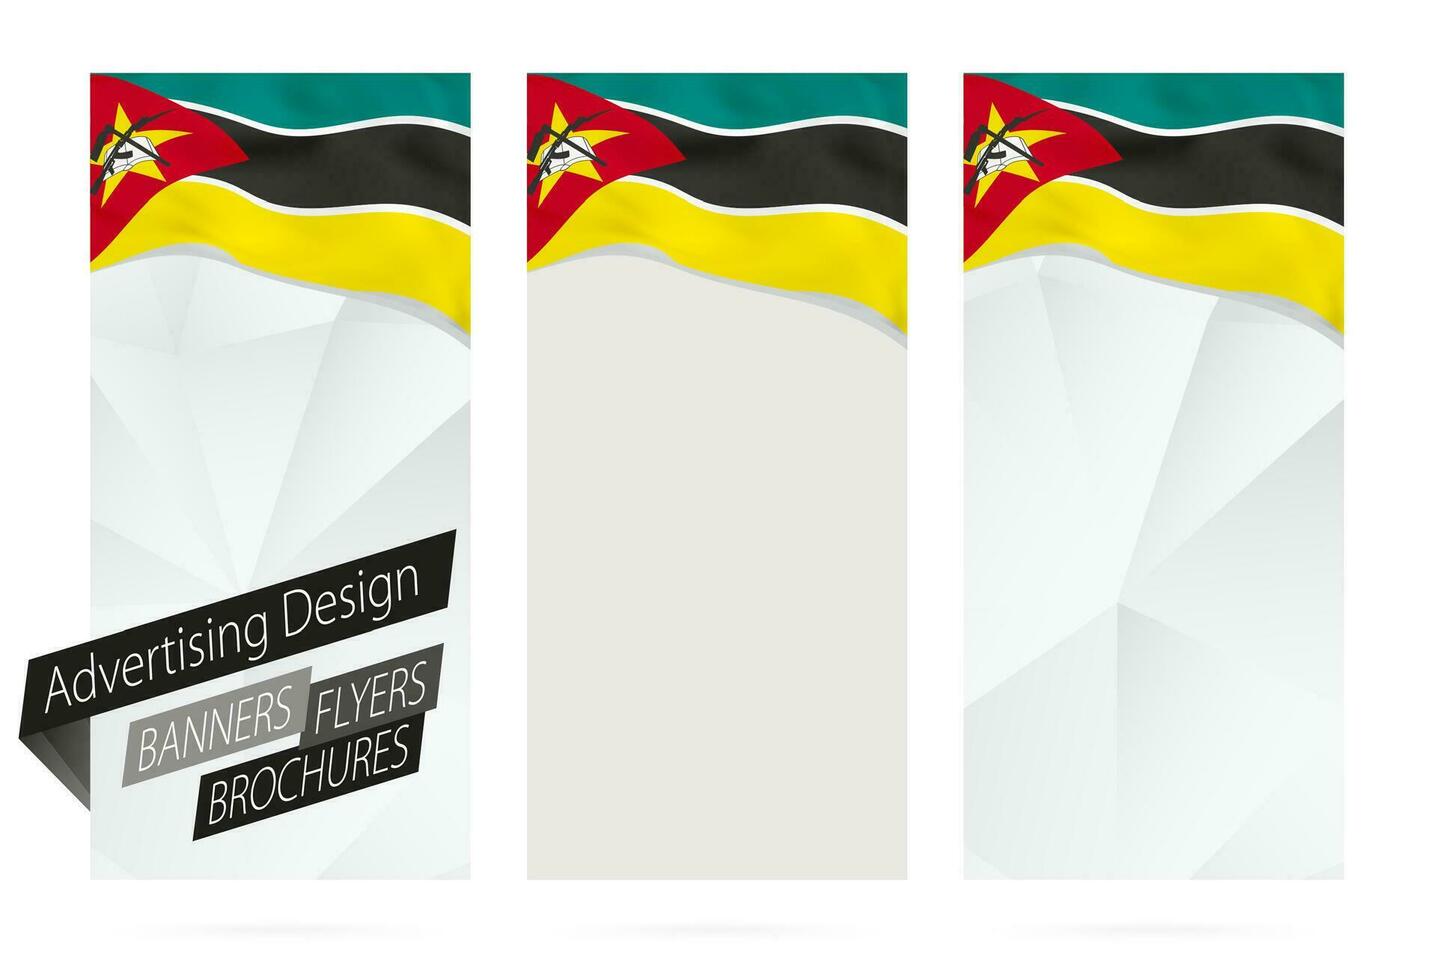 Design of banners, flyers, brochures with flag of Mozambique. vector